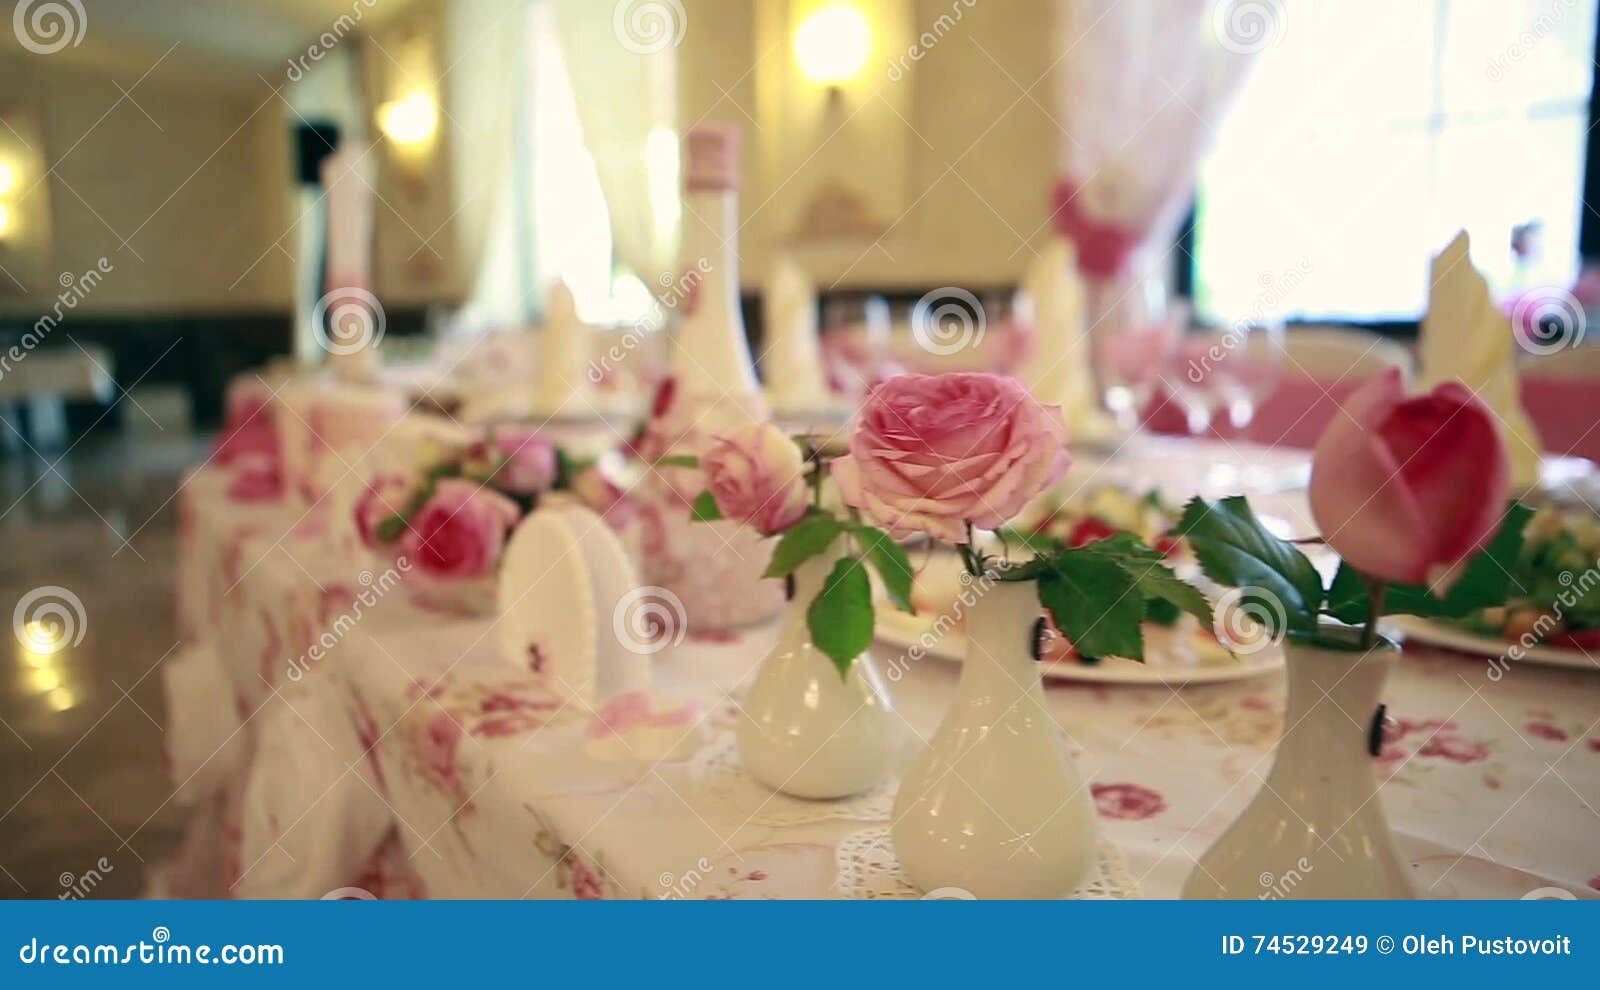 Wedding Banquet The Chairs And Table For Guests Decorated With